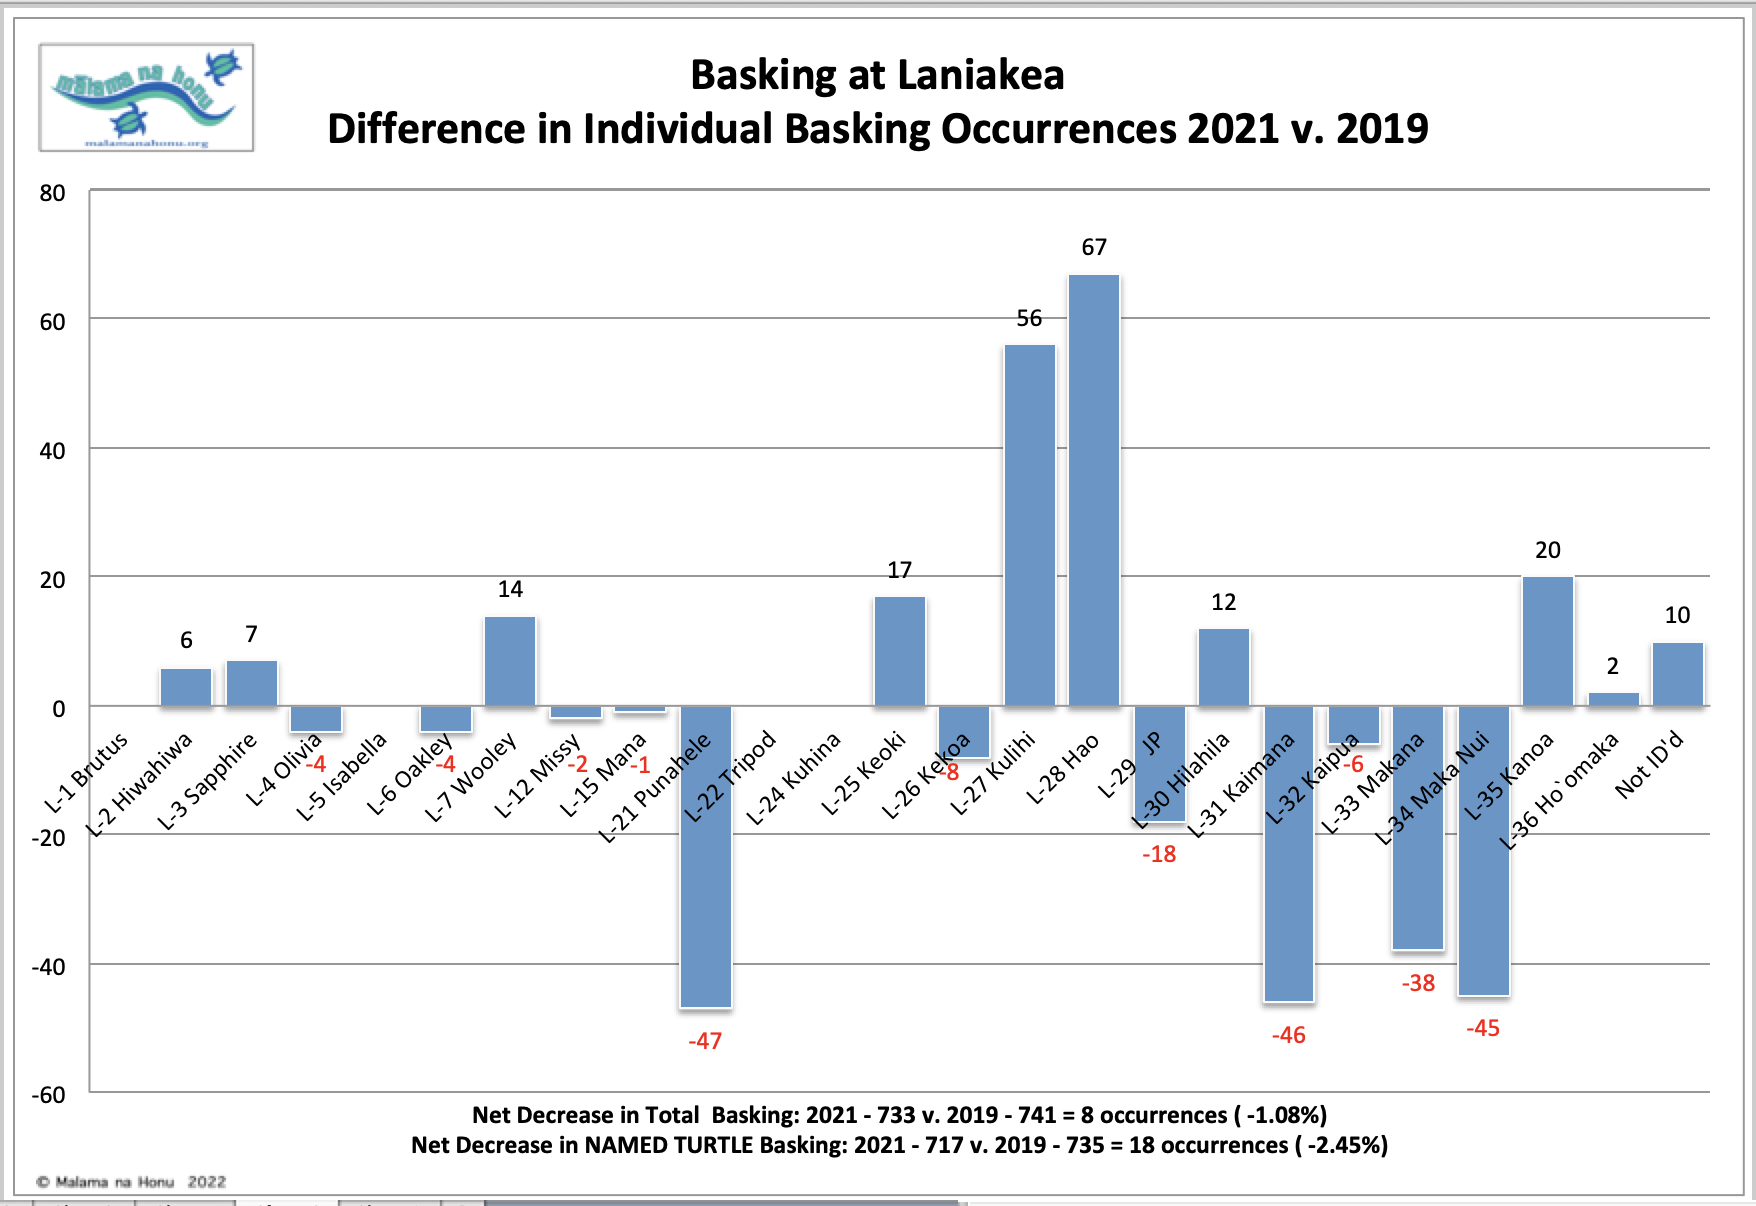 Basking at Laniakea Difference in Individual Basking Occurrences 2021 v 2019